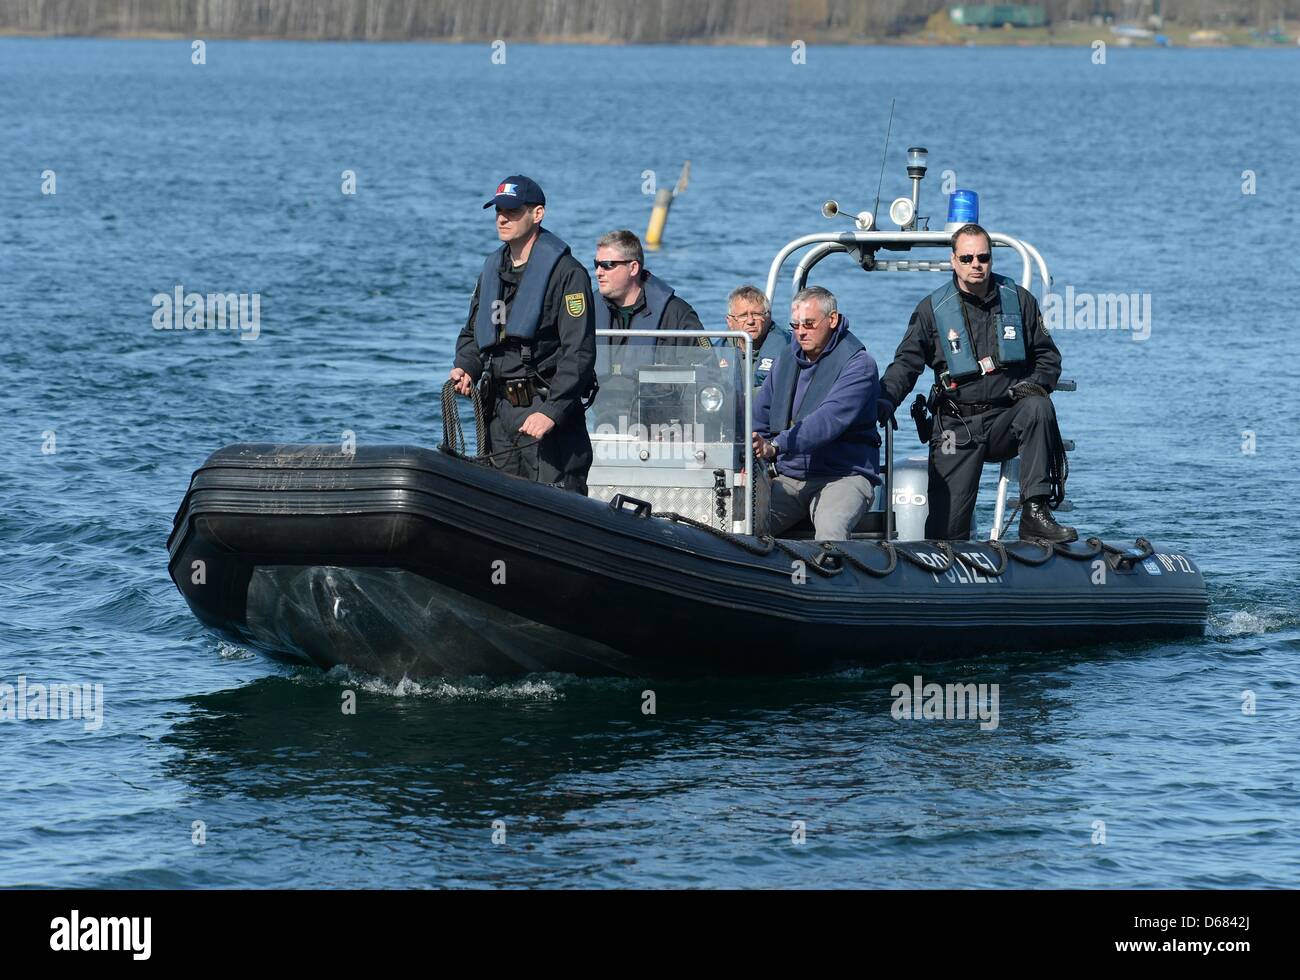 A diving unit of the police search for a diver, that is missing since one year, at the Cospudener Lake in Markkleeberg, Germany, 15 April 2013. Hobby divers discovered the corpse of a diver, that went missing a year ago, on the bottom of the Cospudener Lake. Photo: Hendrik Schmidt Stock Photo